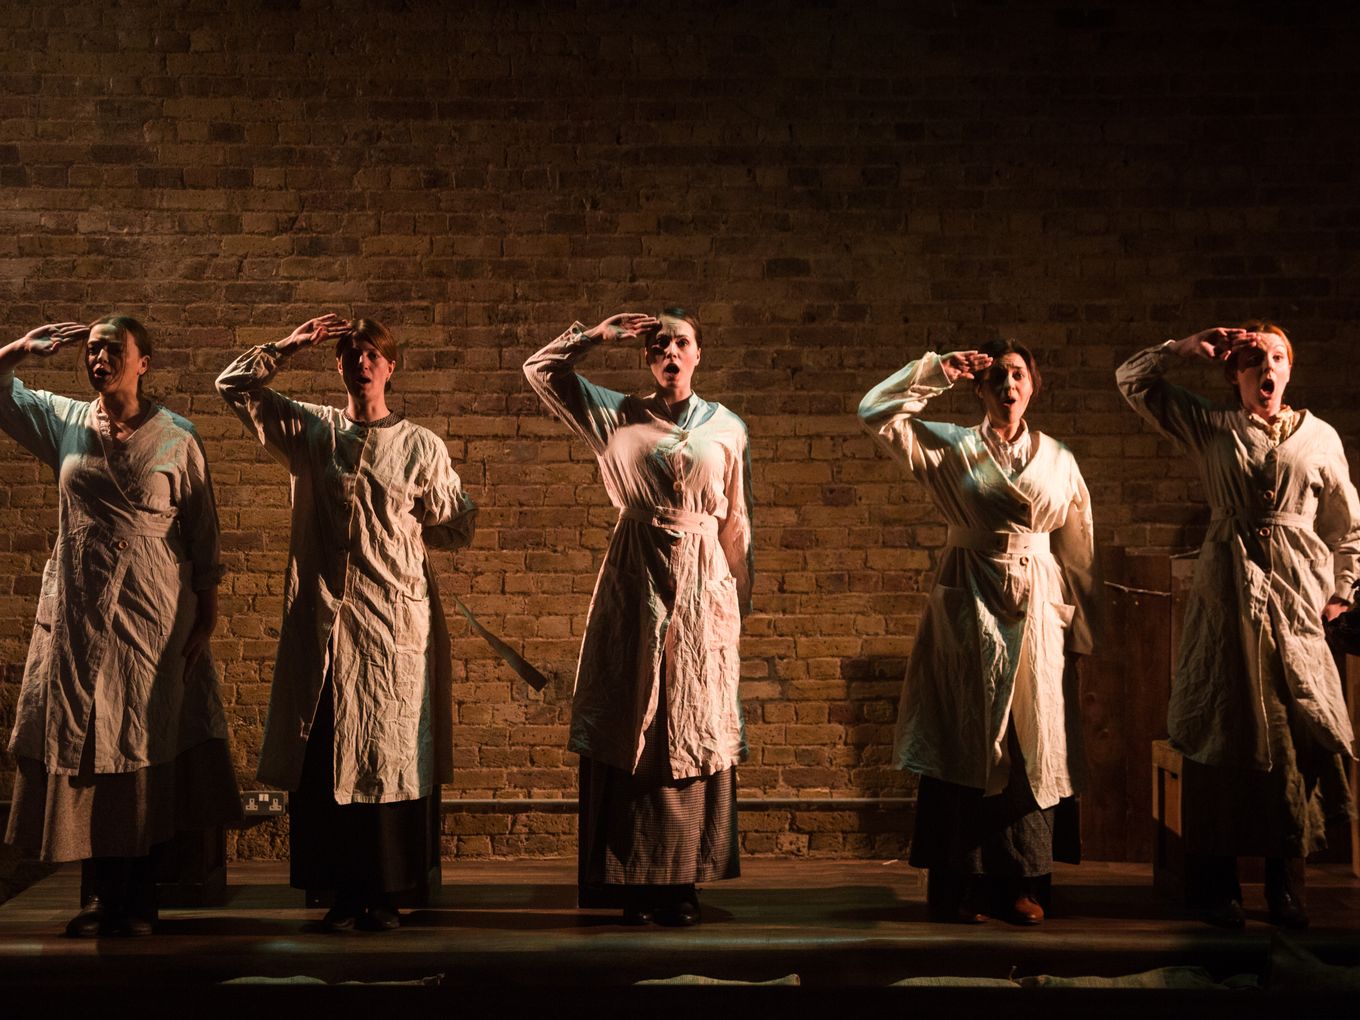 Five brightly side lit women salute in front of a brick wall